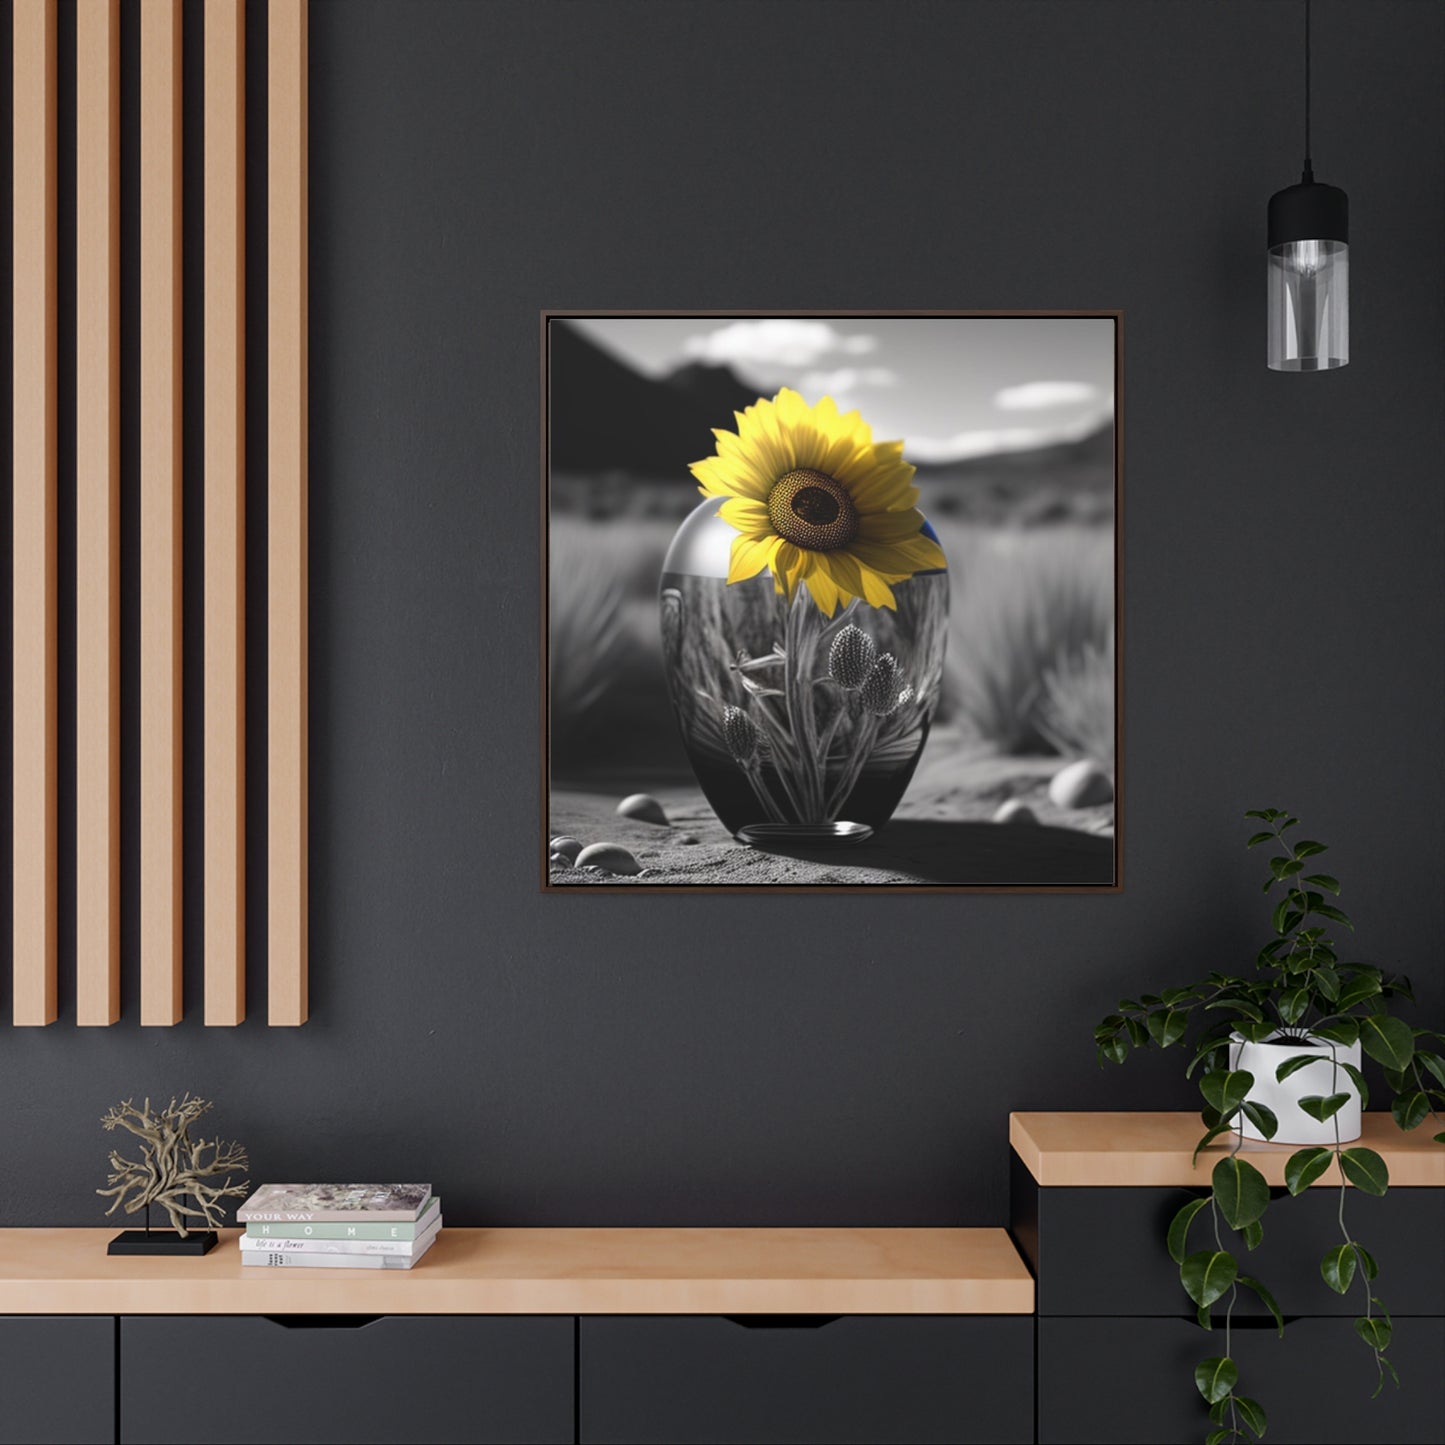 Gallery Canvas Wraps, Square Frame Yellw Sunflower in a vase 3